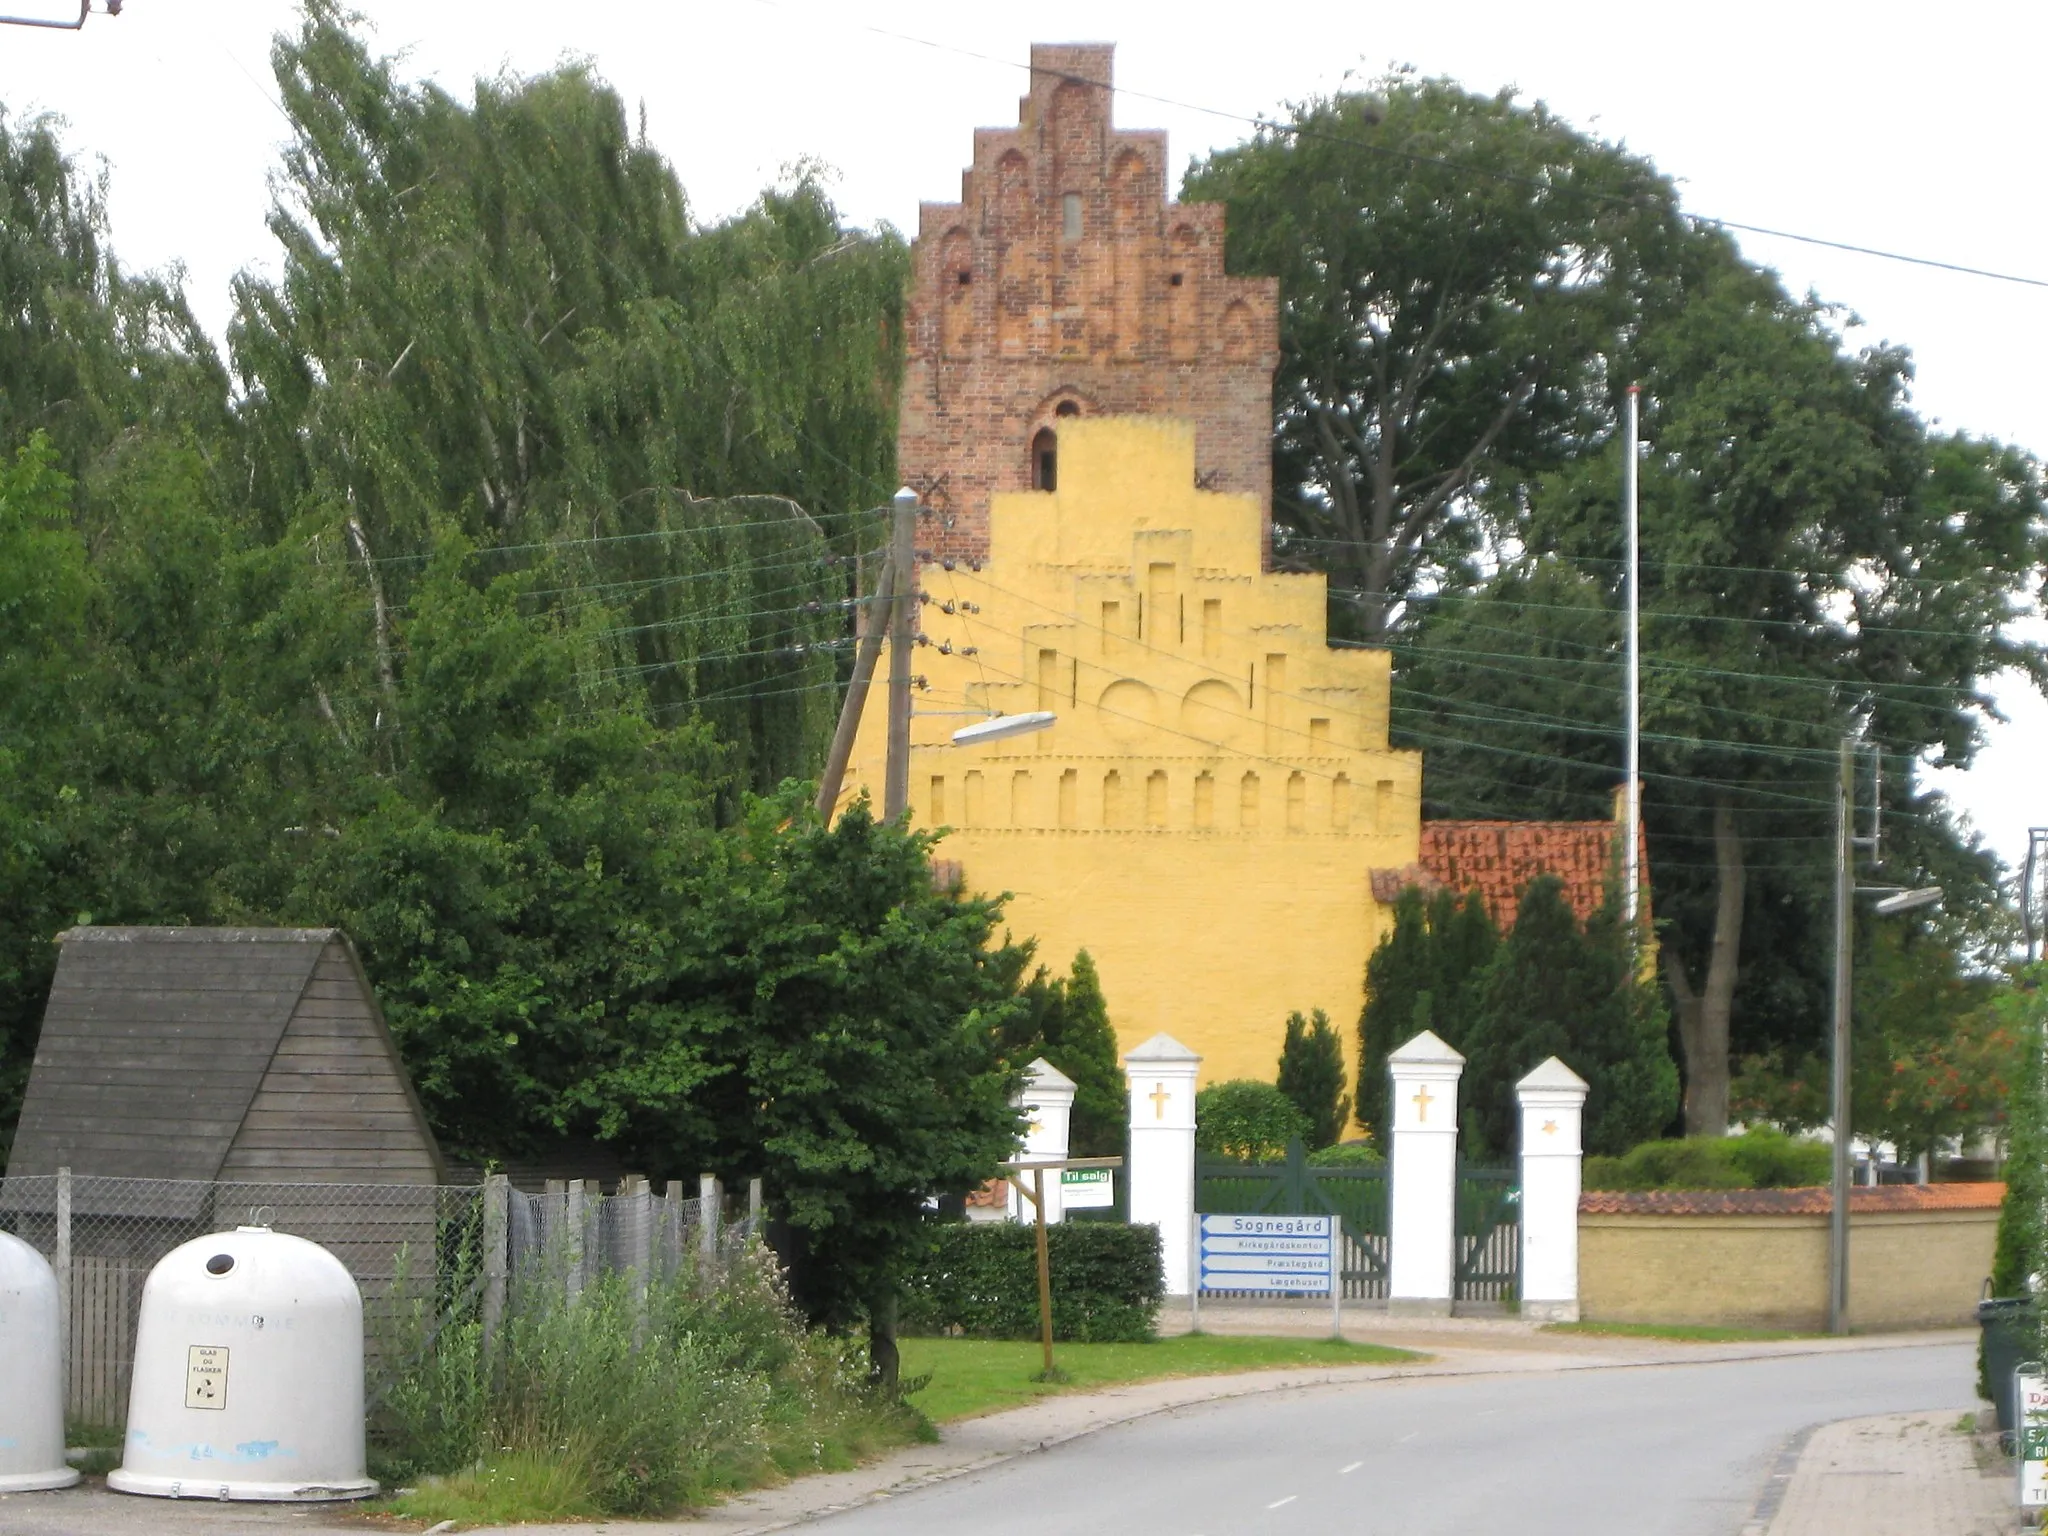 Photo showing: The church "Terslev Kirke" in the village "Terslev", Faxe Municipality. The village is located on South Zealand in east Denmark.